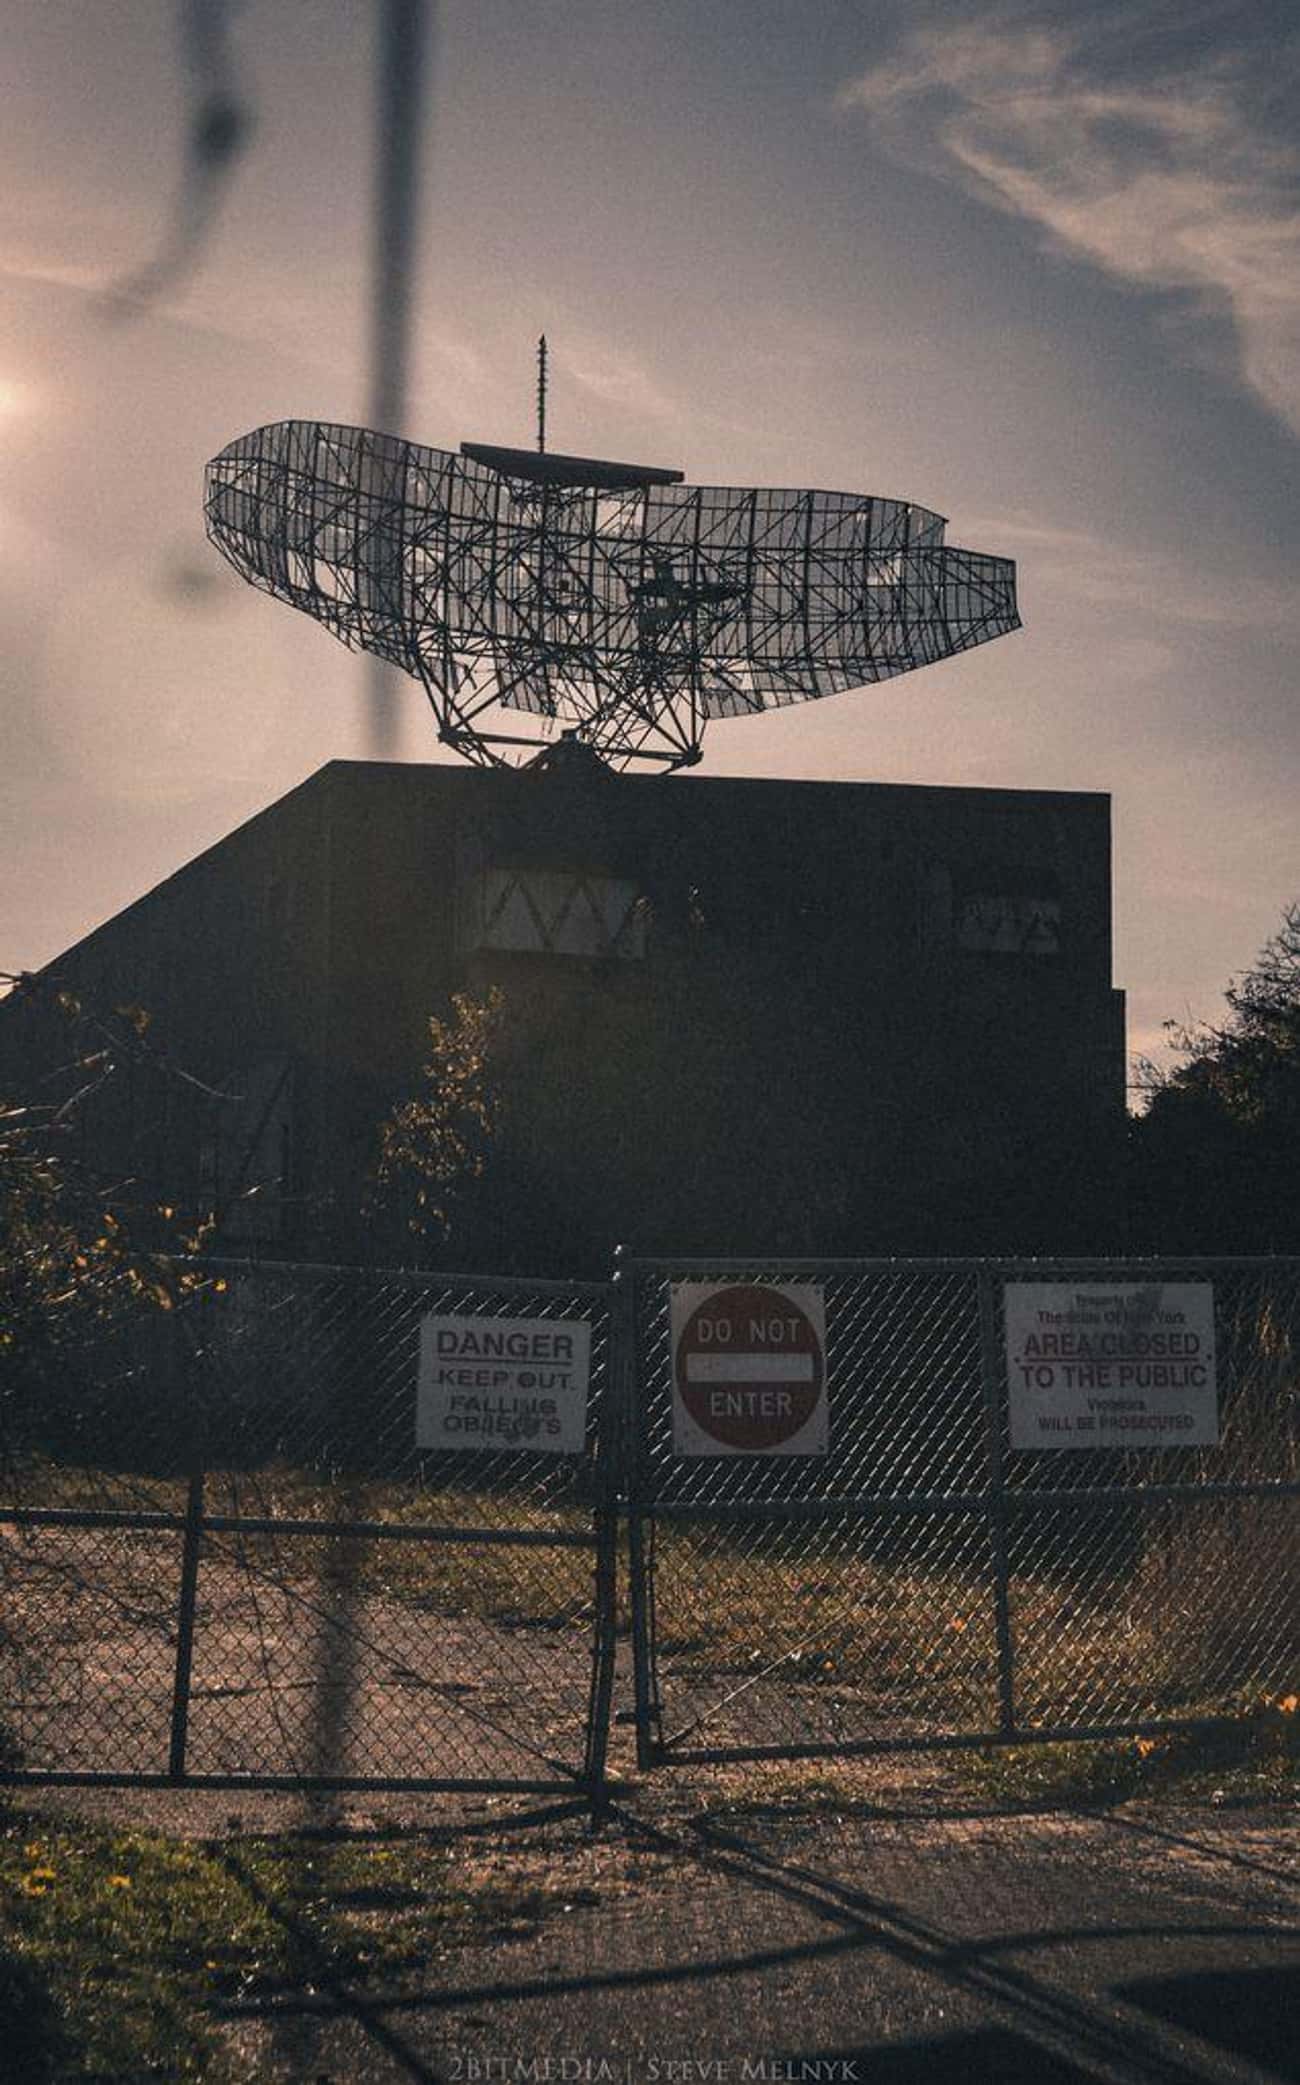 New York's Montauk Project Experimented With Time Travel And Inspired 'Stranger Things'